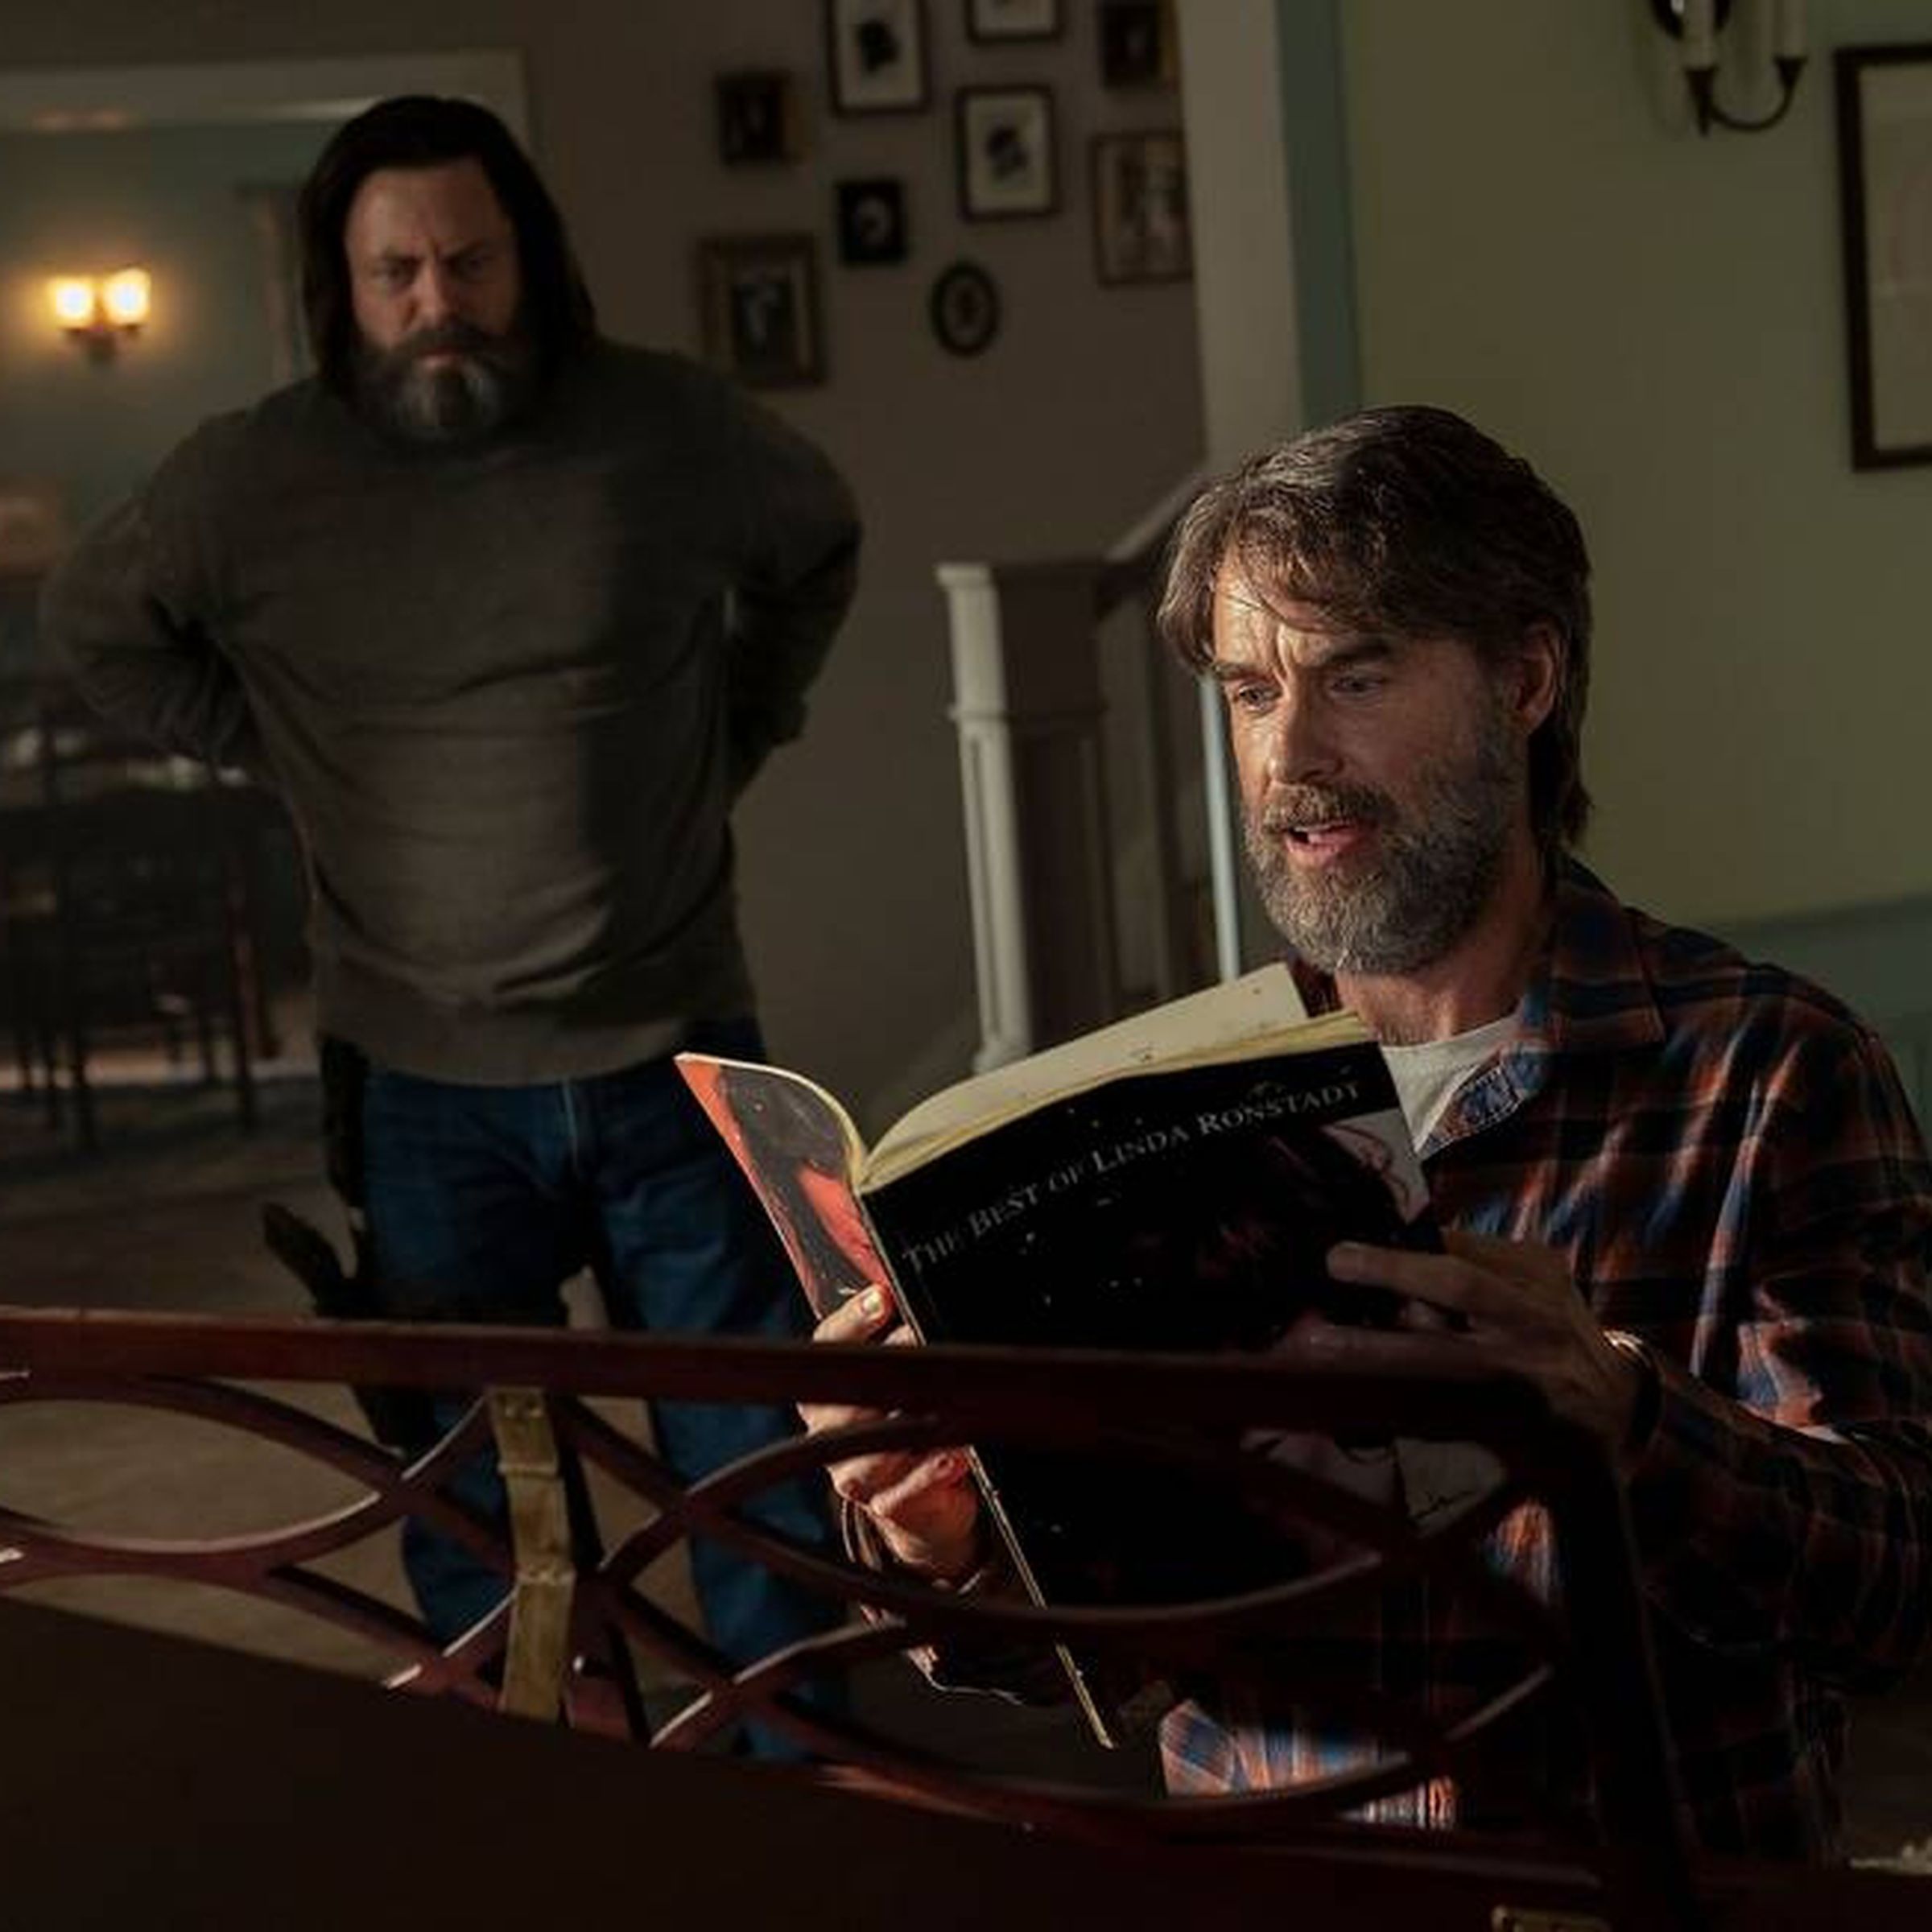 A bearded man wearing a flannel and holding a book of music while sitting at a piano. In the background, another bearded man wearing a sweater, and holding his hands on his hips is looking on.